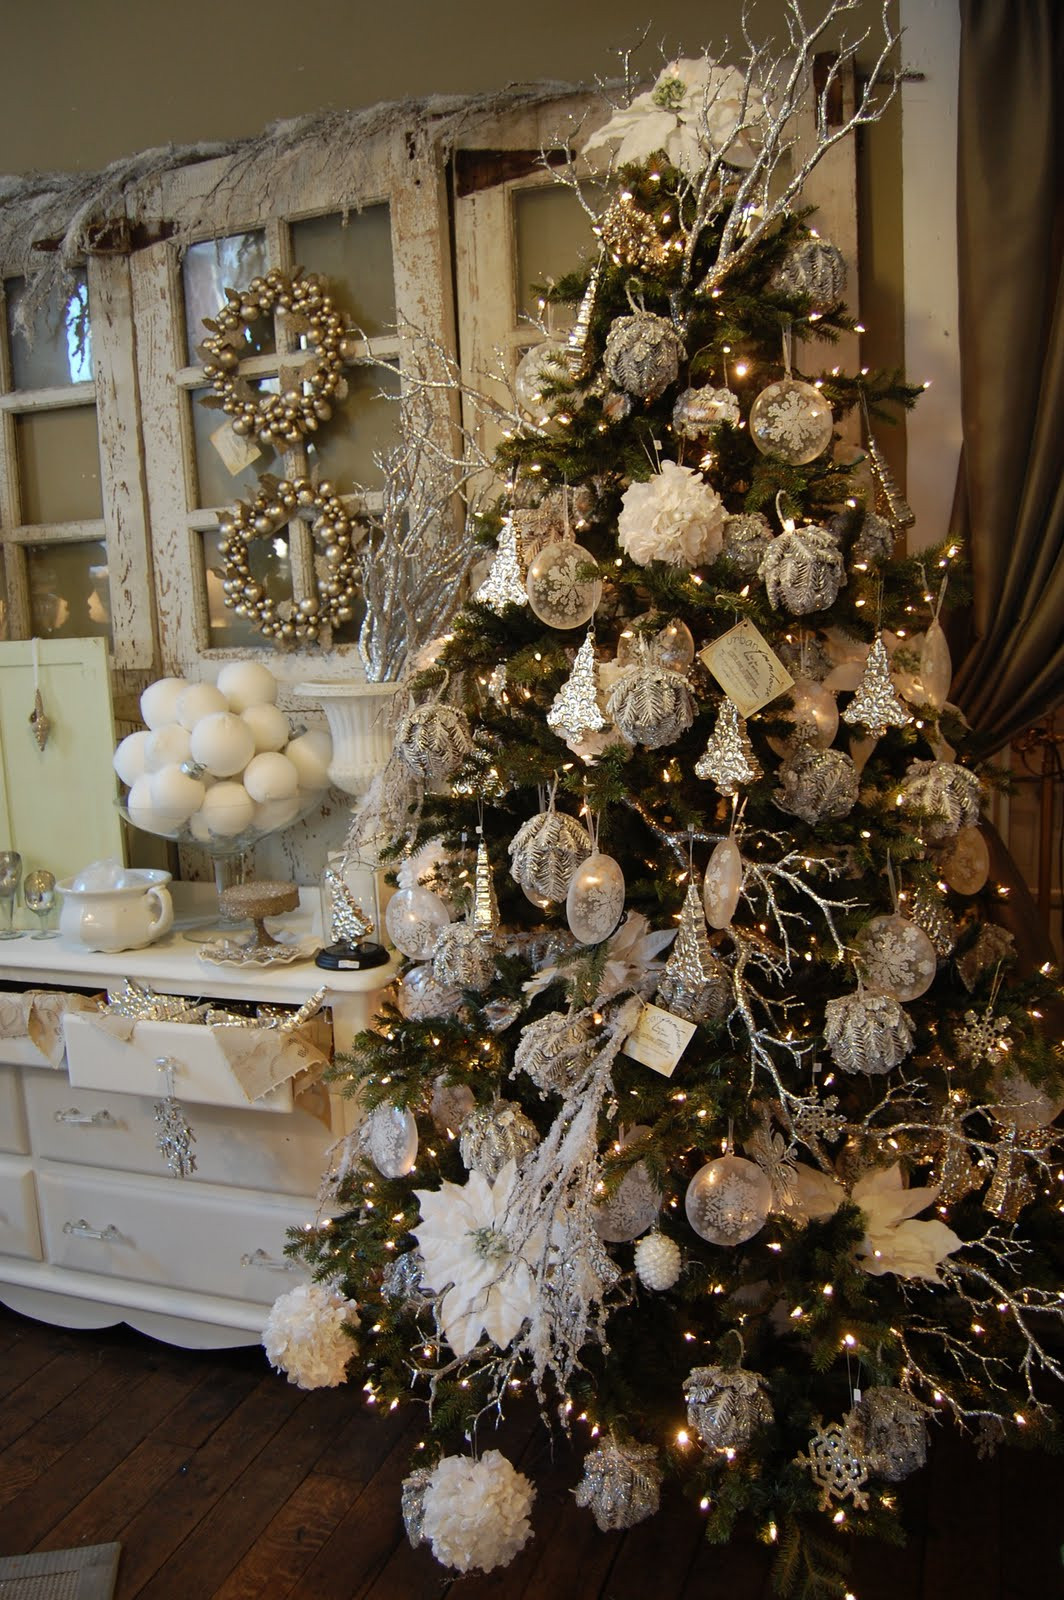 Shabby Chic Christmas Tree Decorations
 urban farmhouse Just SOME of the photos from our